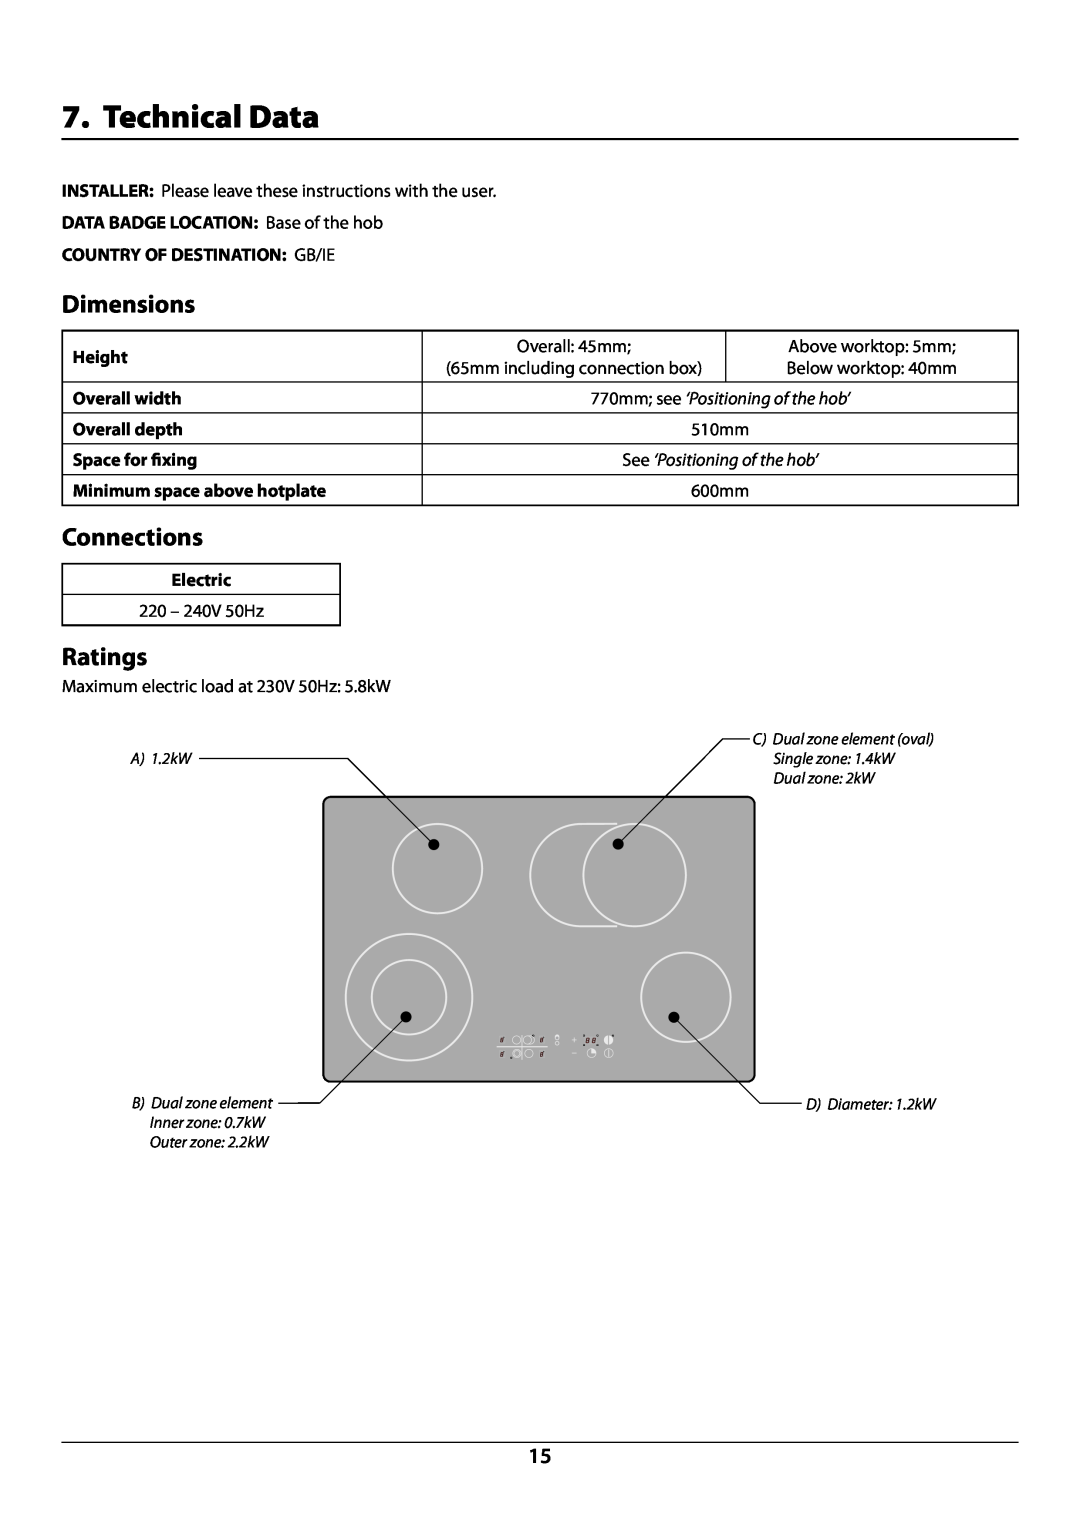 Rangemaster manual Technical Data, Dimensions, Connections, Ratings, DocNo.102-0002 - Technical data - RC77 